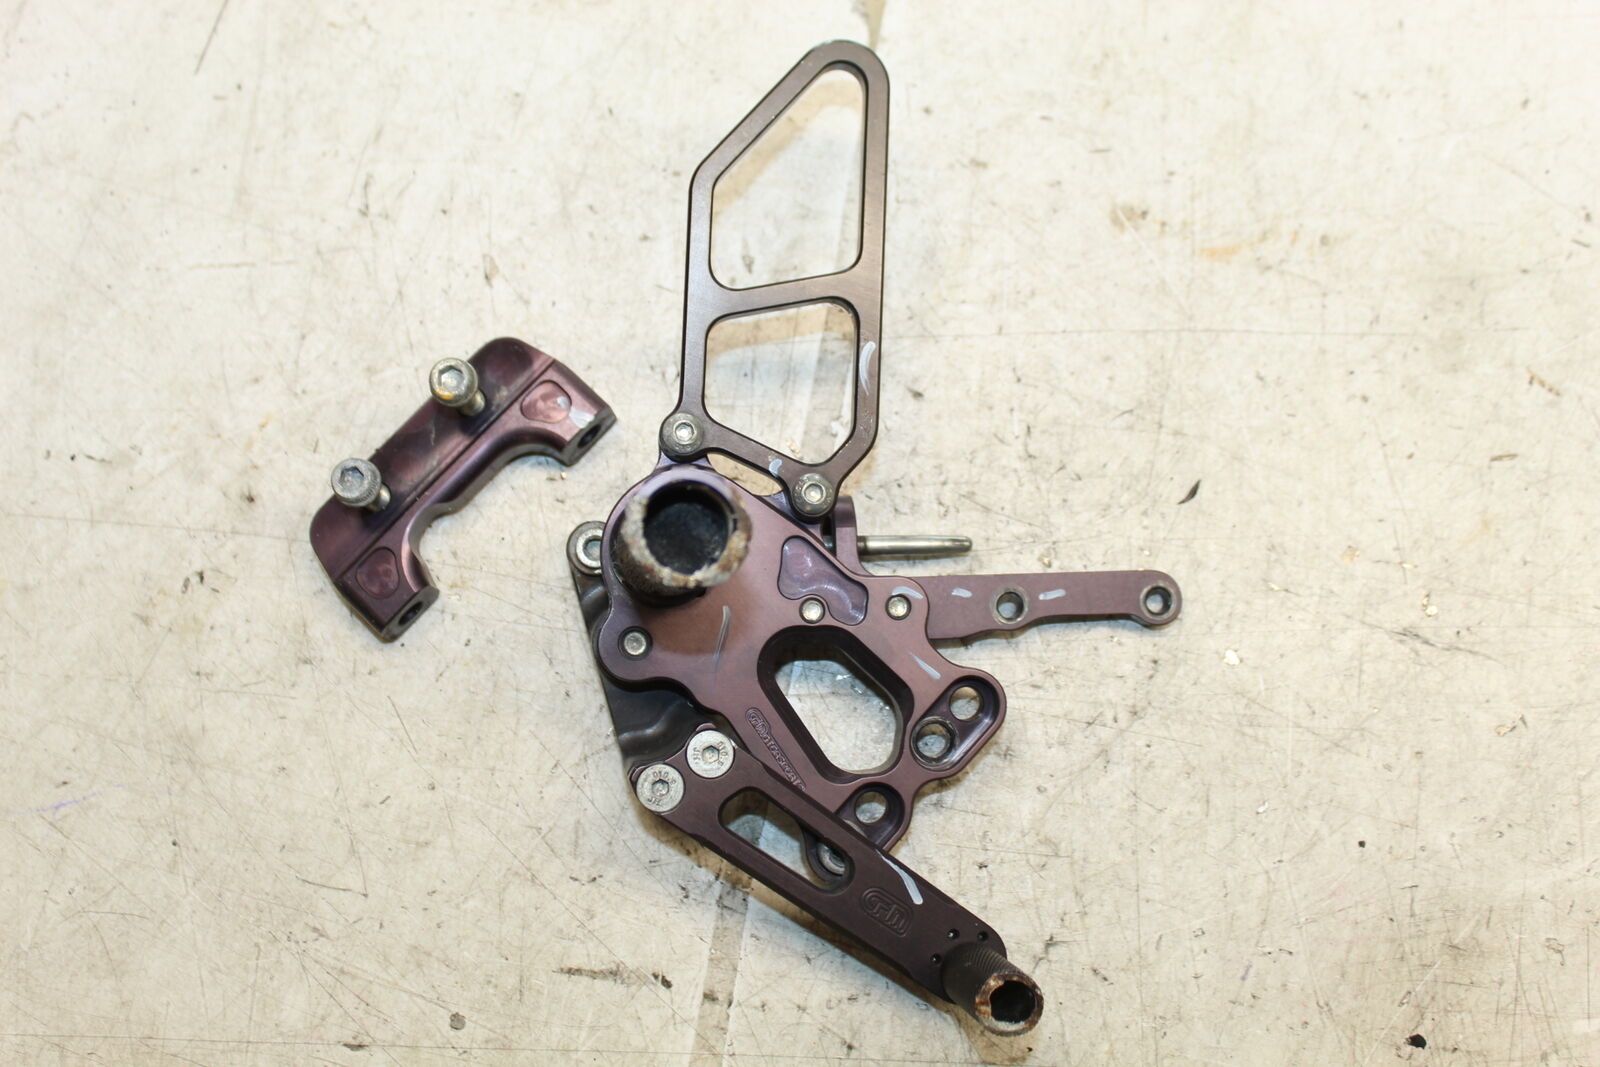 online shop 018 Max 85% OFF DUCATI 959 PANIGALE AFTERMARKET DRIVE RIGHT REAR REARSET SET